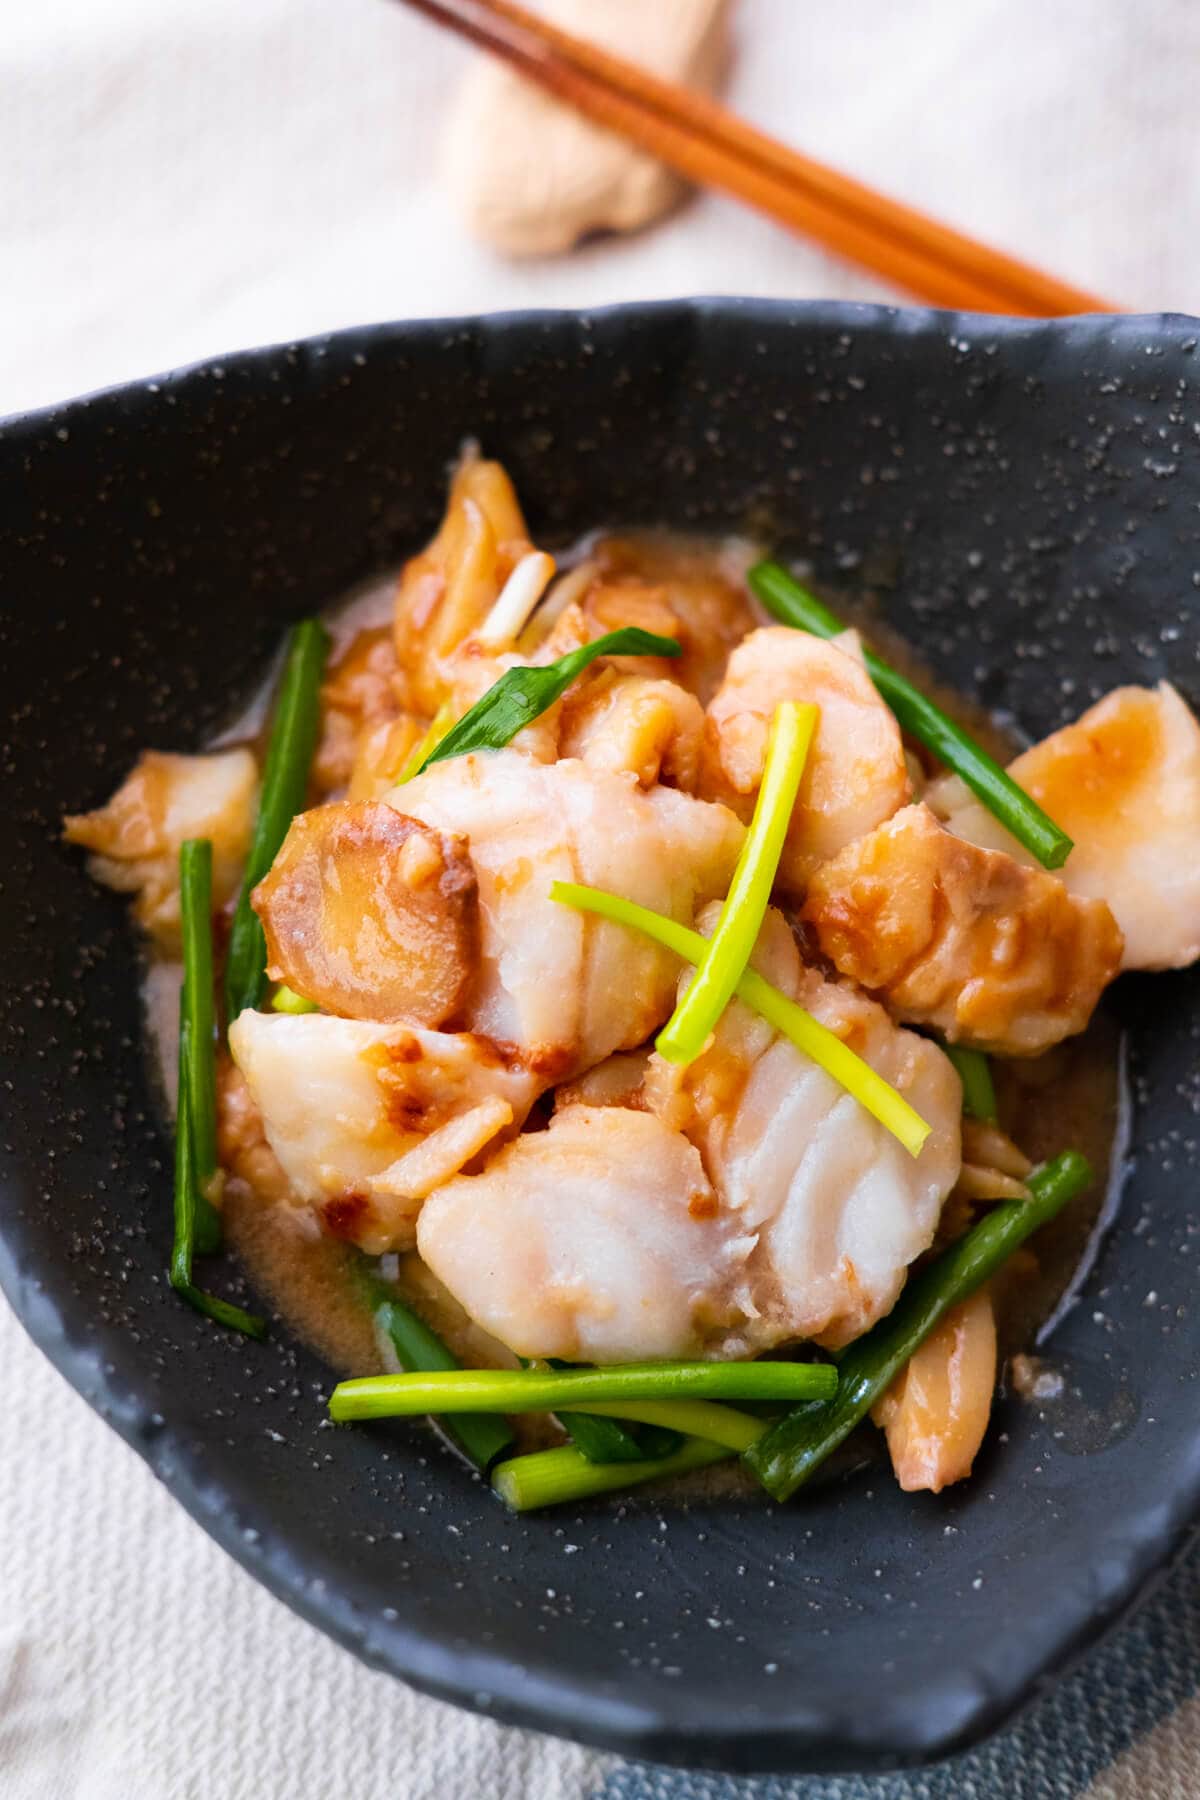 A quick and easy ginger and scallion fish recipe with fish fillet, ginger, and scallions. 
